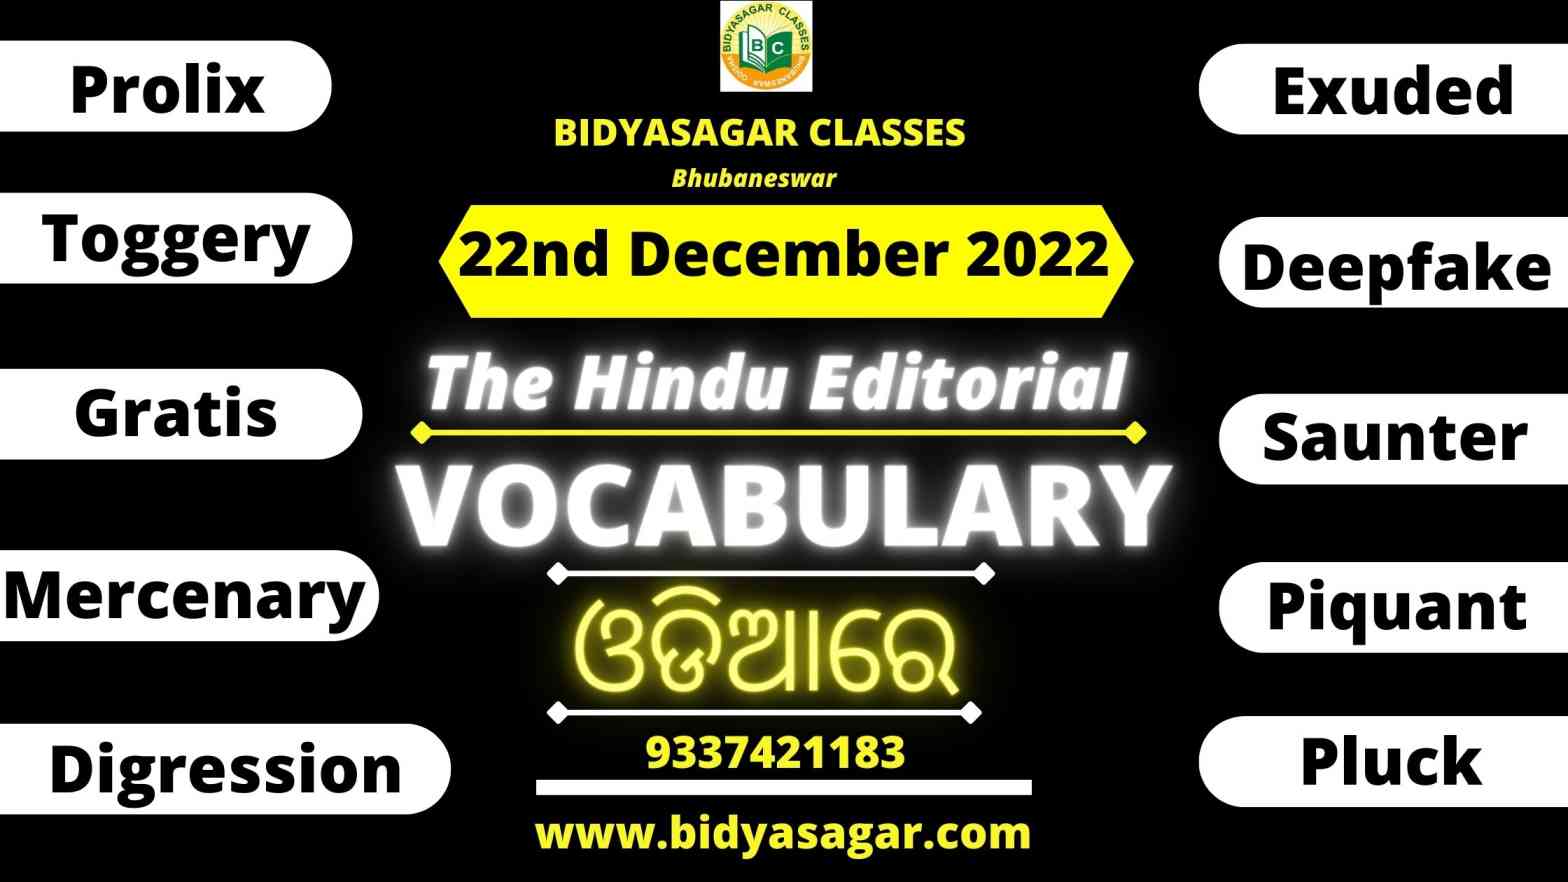 The Hindu Editorial Vocabulary of 22nd december 2022